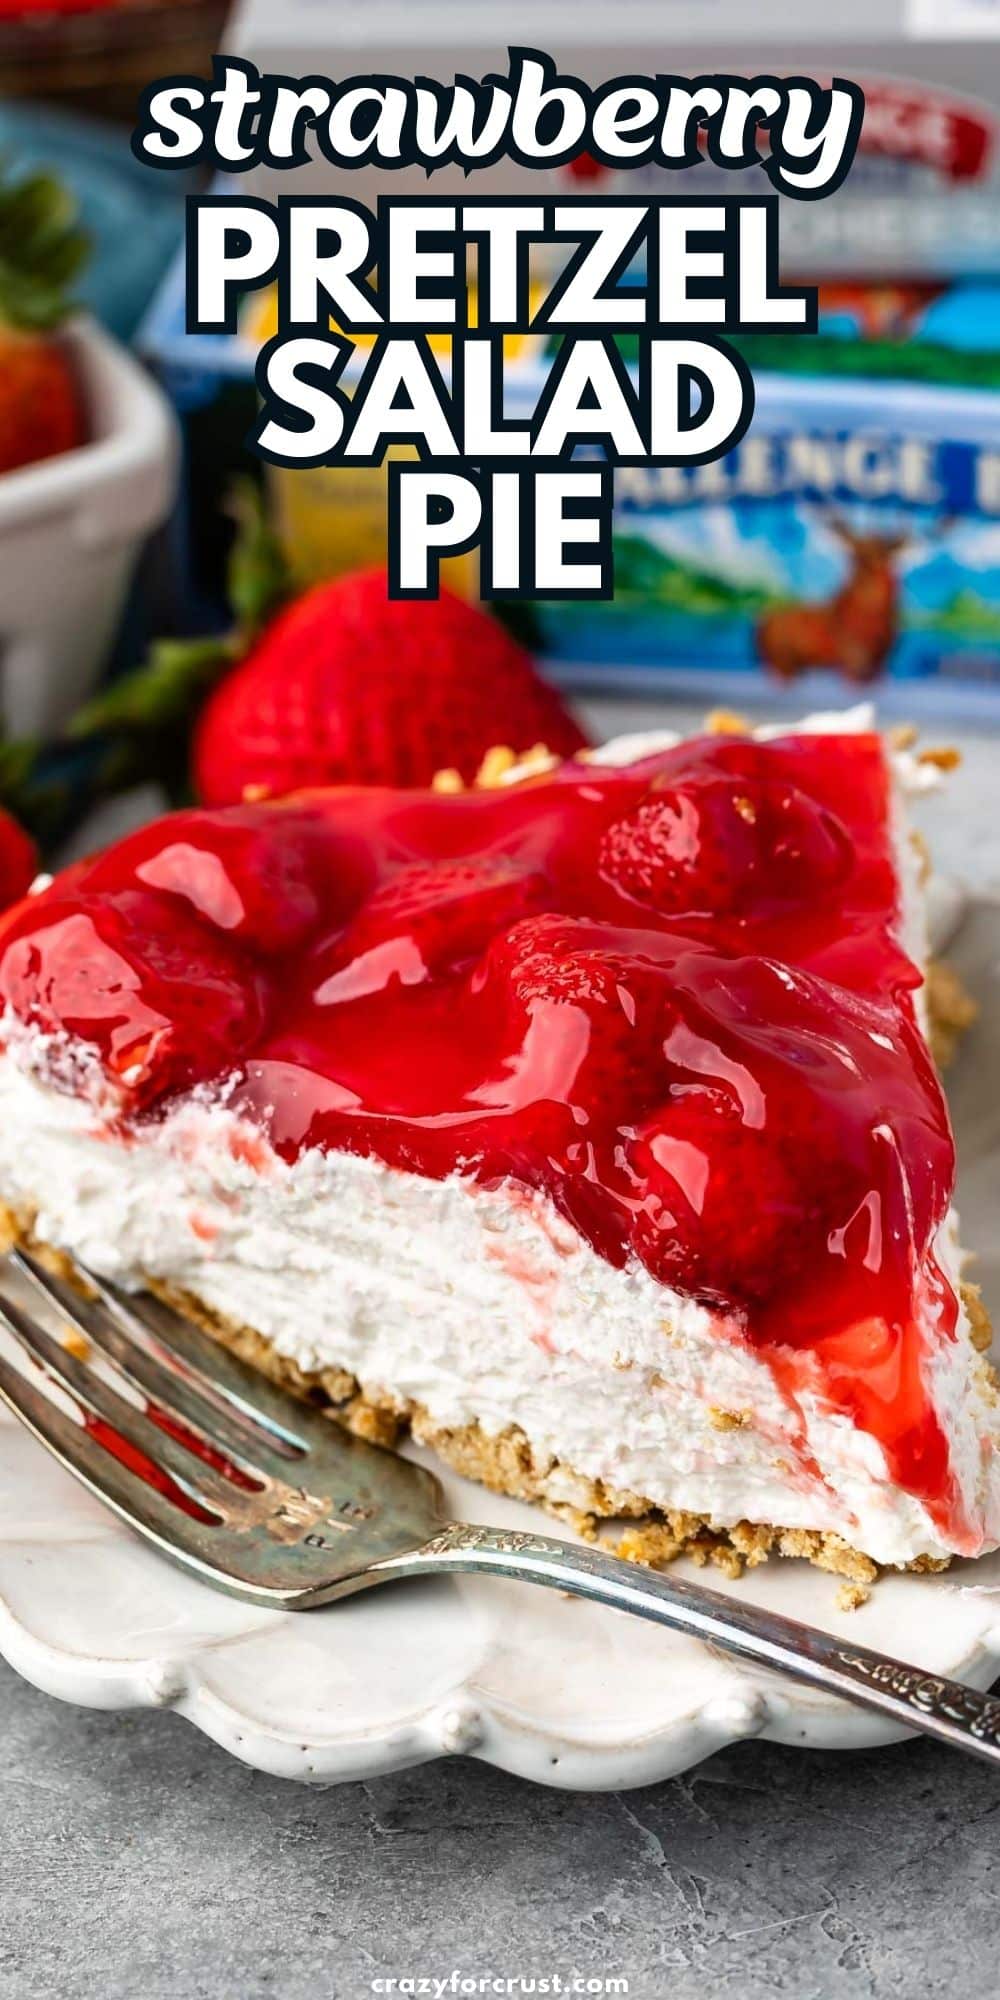 slice of pie on white plate with words on photo.